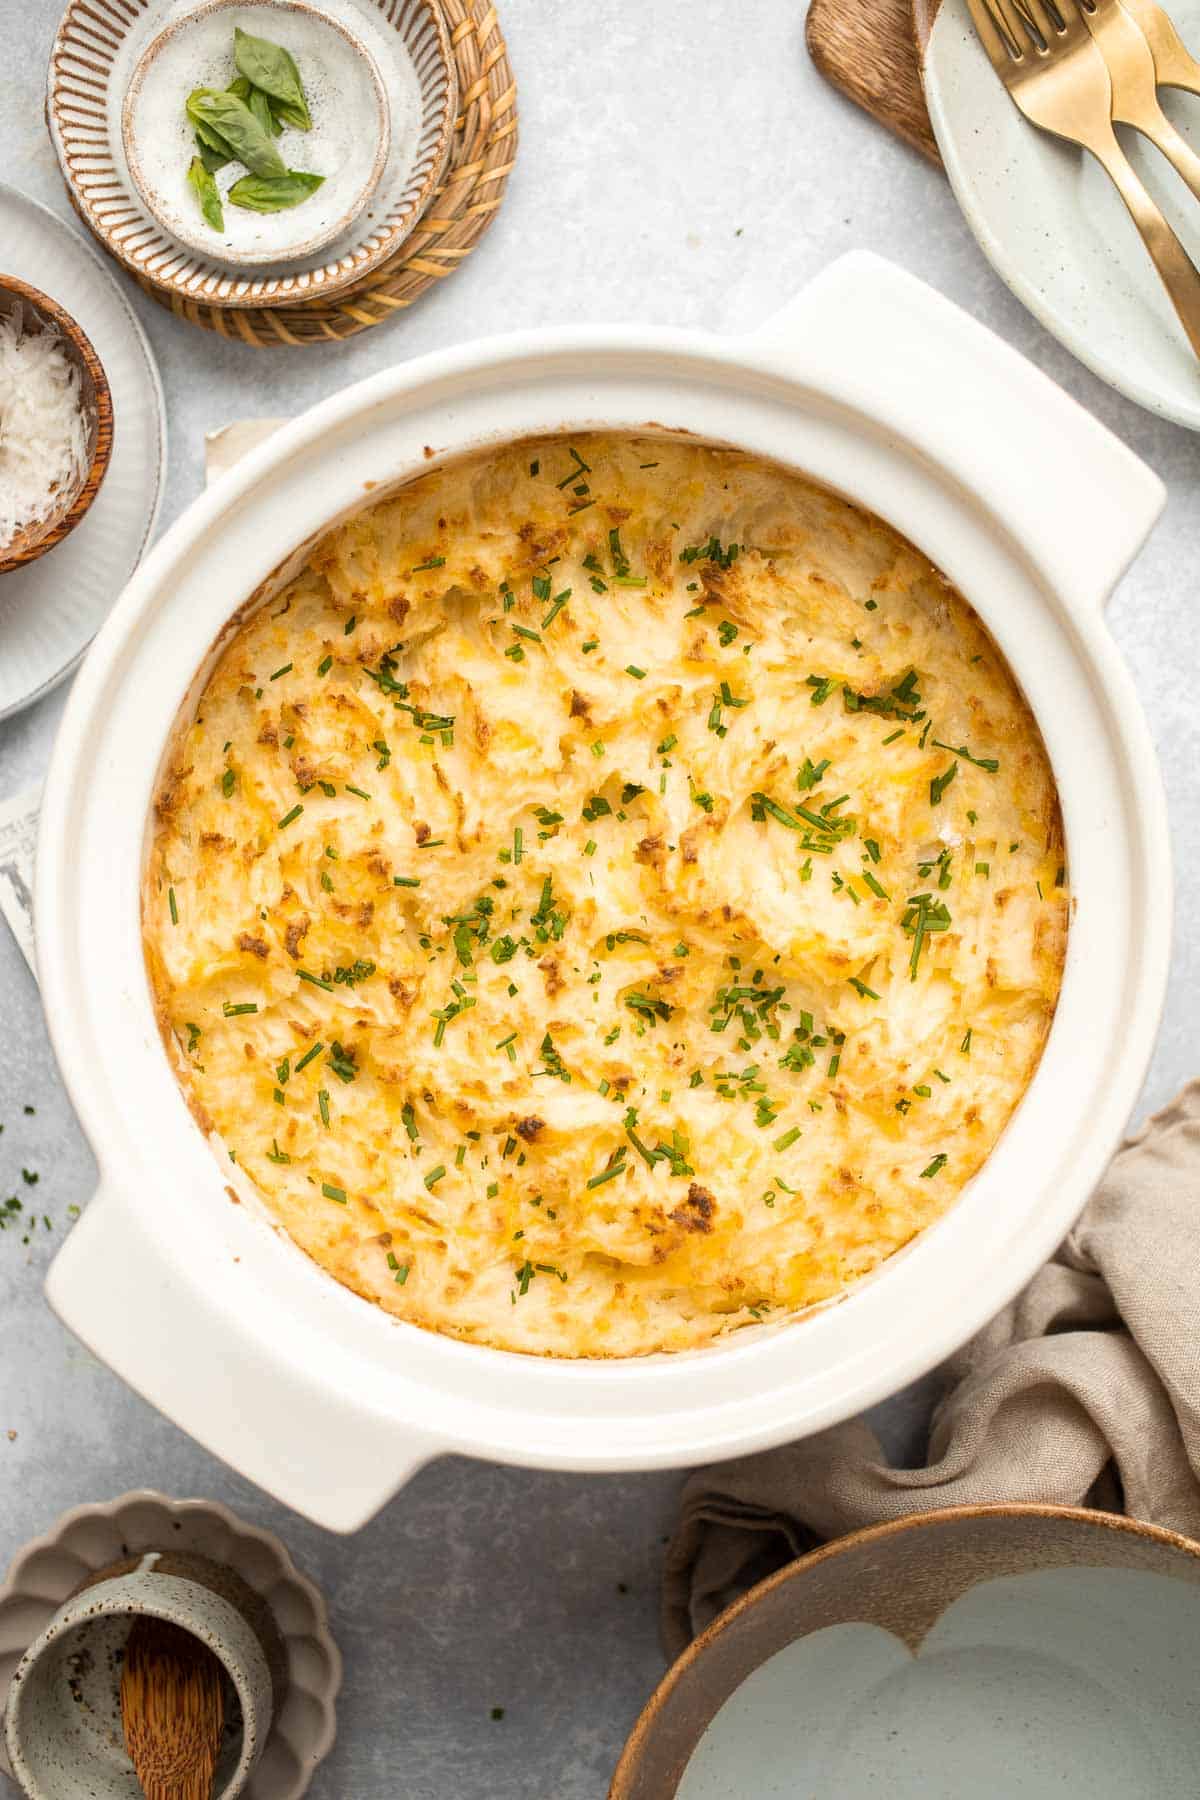 Baked Mashed Potatoes are buttery, cheesy, and crispy on the outside. Topped with chives and served warm, this side dish that will change your hosting game. | aheadofthyme.com 